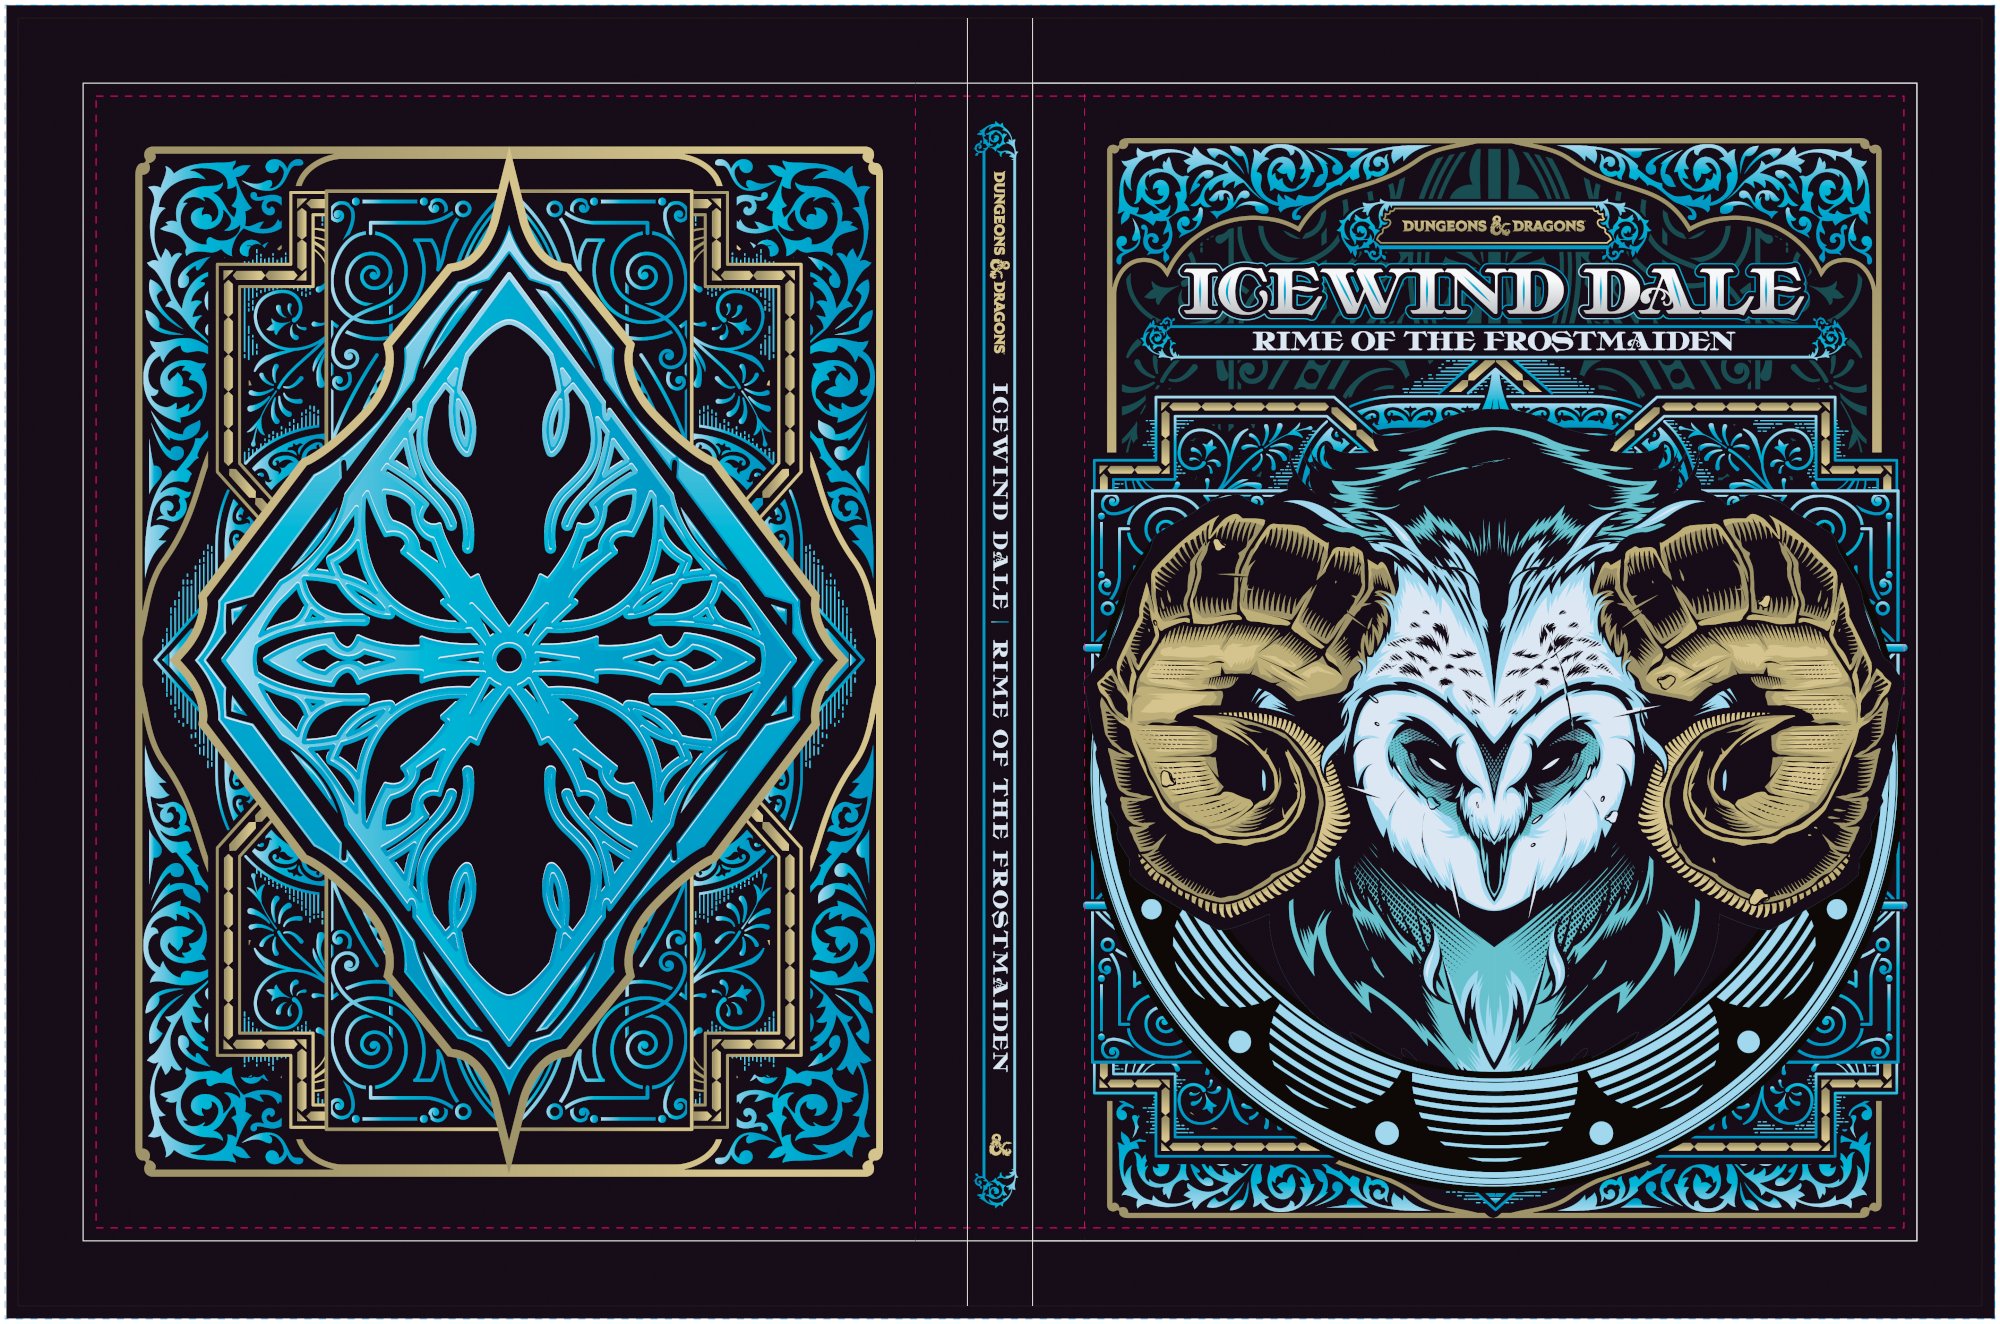 Icewind Dale Hydro47 front and back covers.jpg